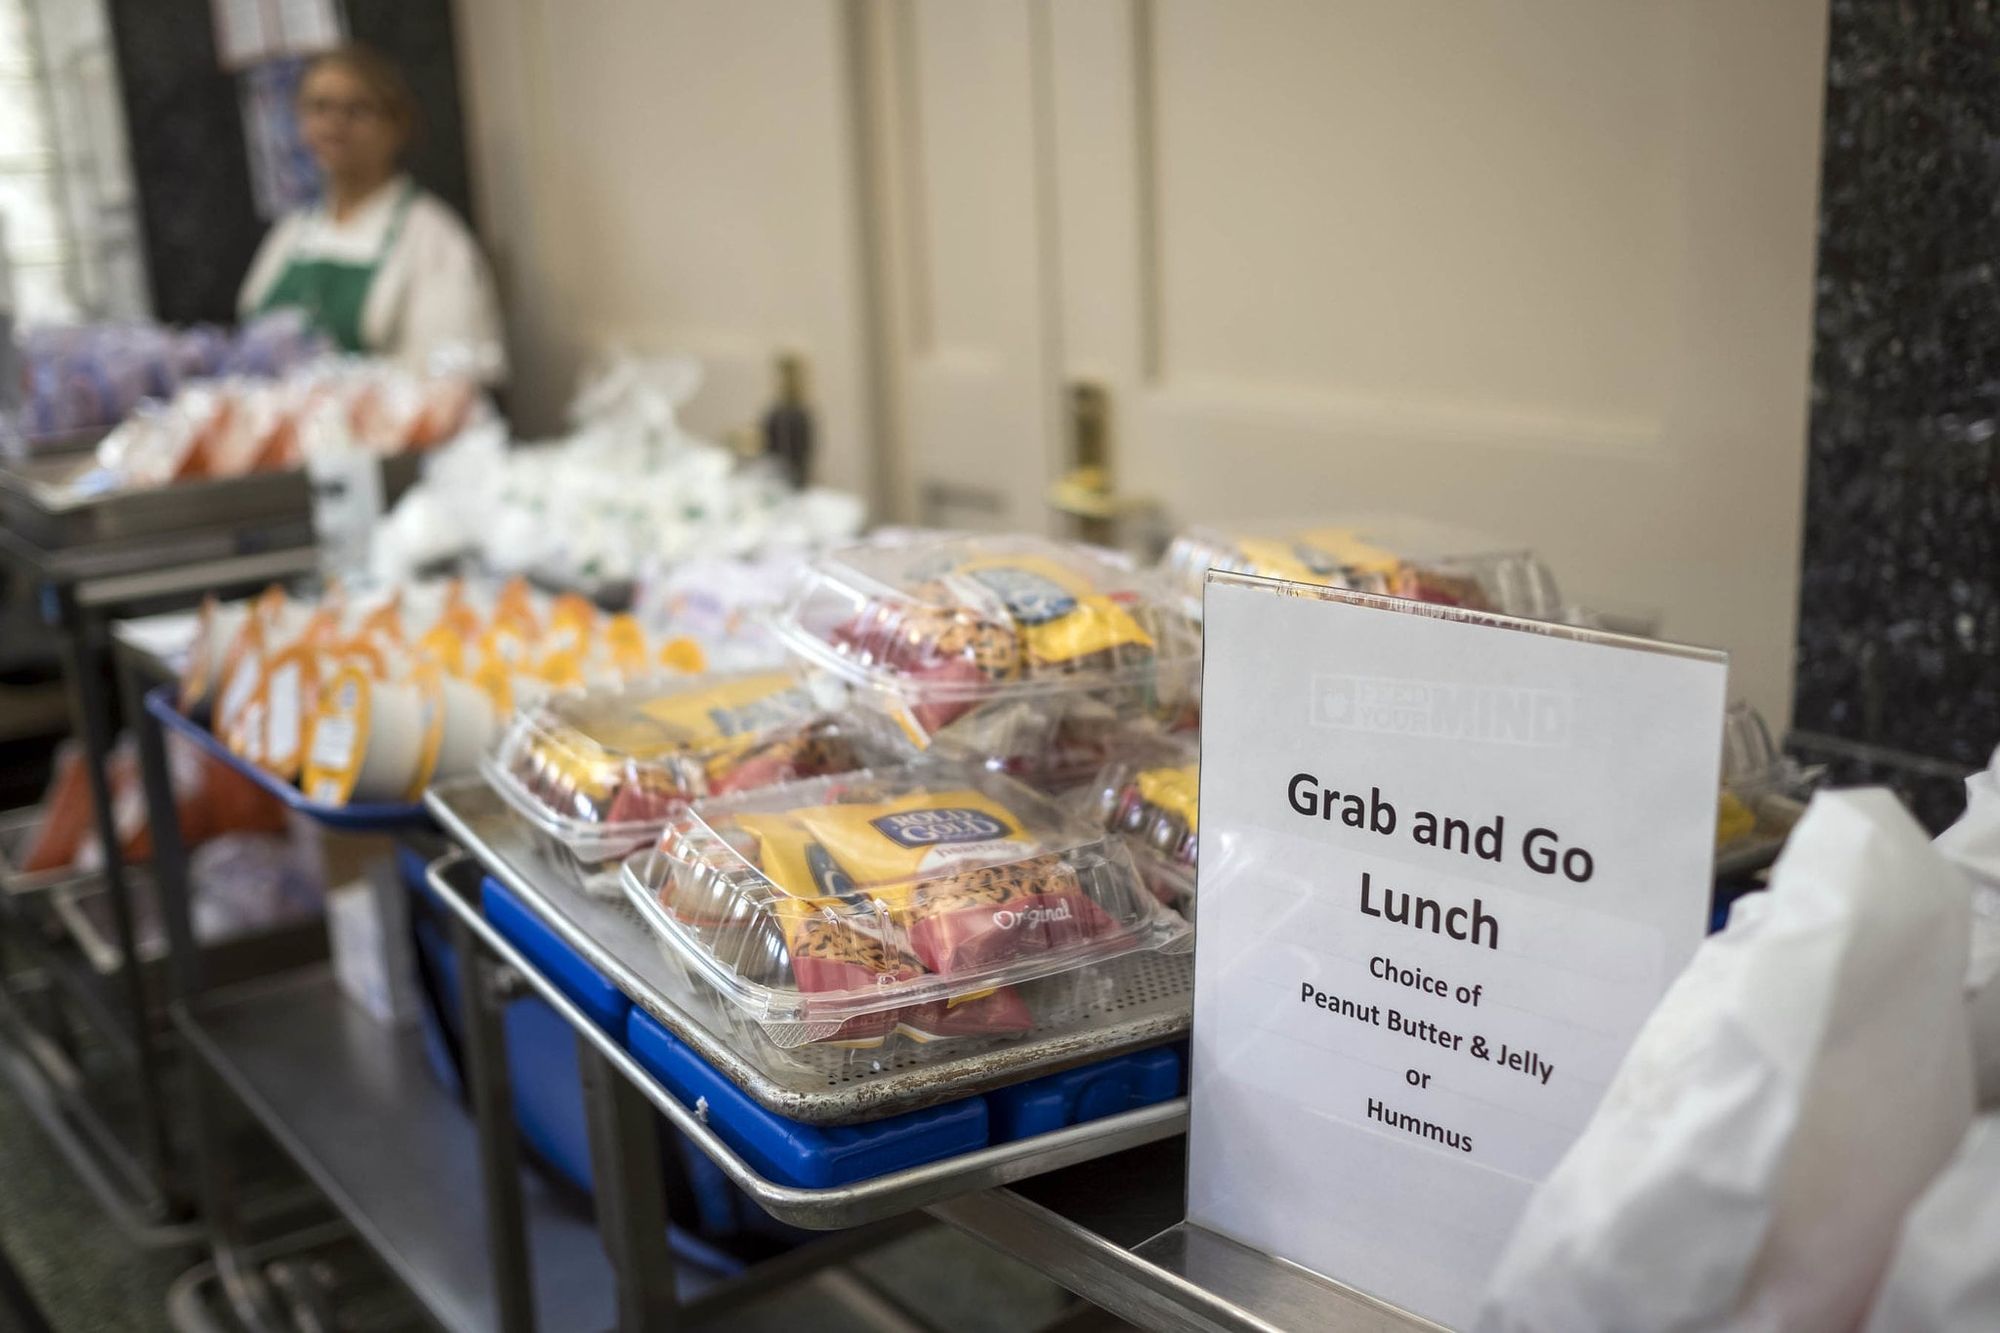 Plan In Works To Expand Free NYC School Meals To Adults, Too